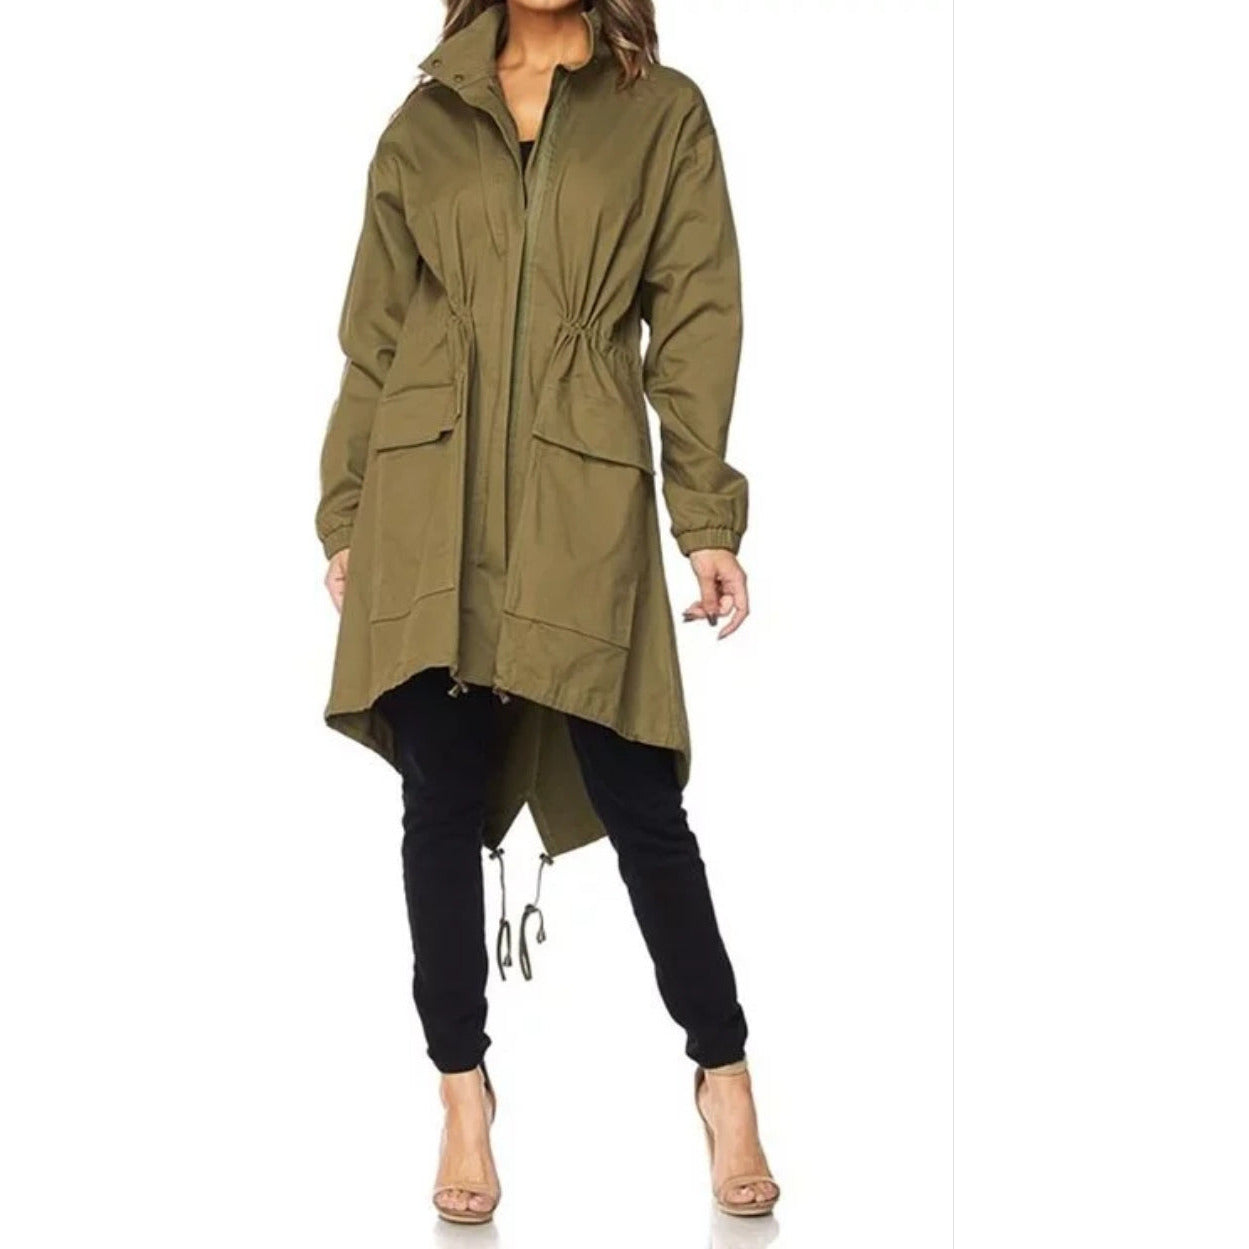 Oversized Cargo Jacket (Olive) - Ariya's Apparel and Accessories